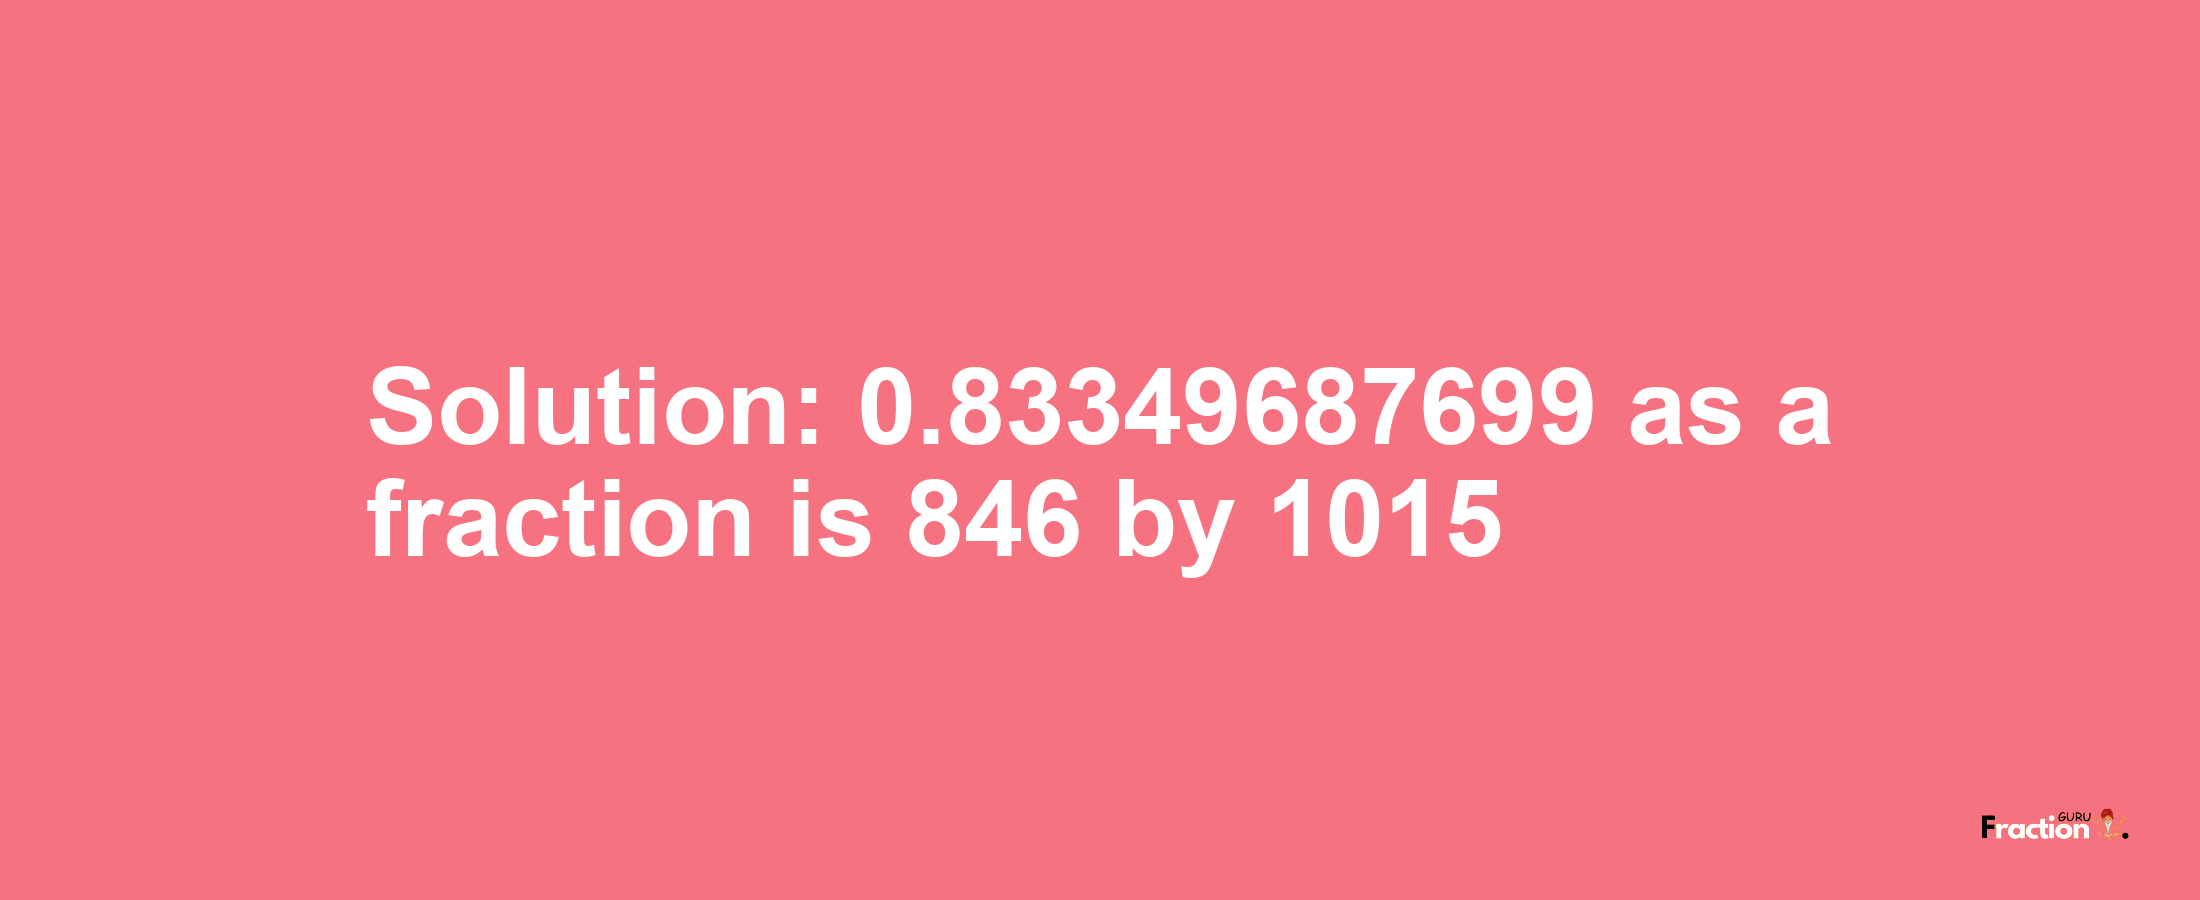 Solution:0.83349687699 as a fraction is 846/1015